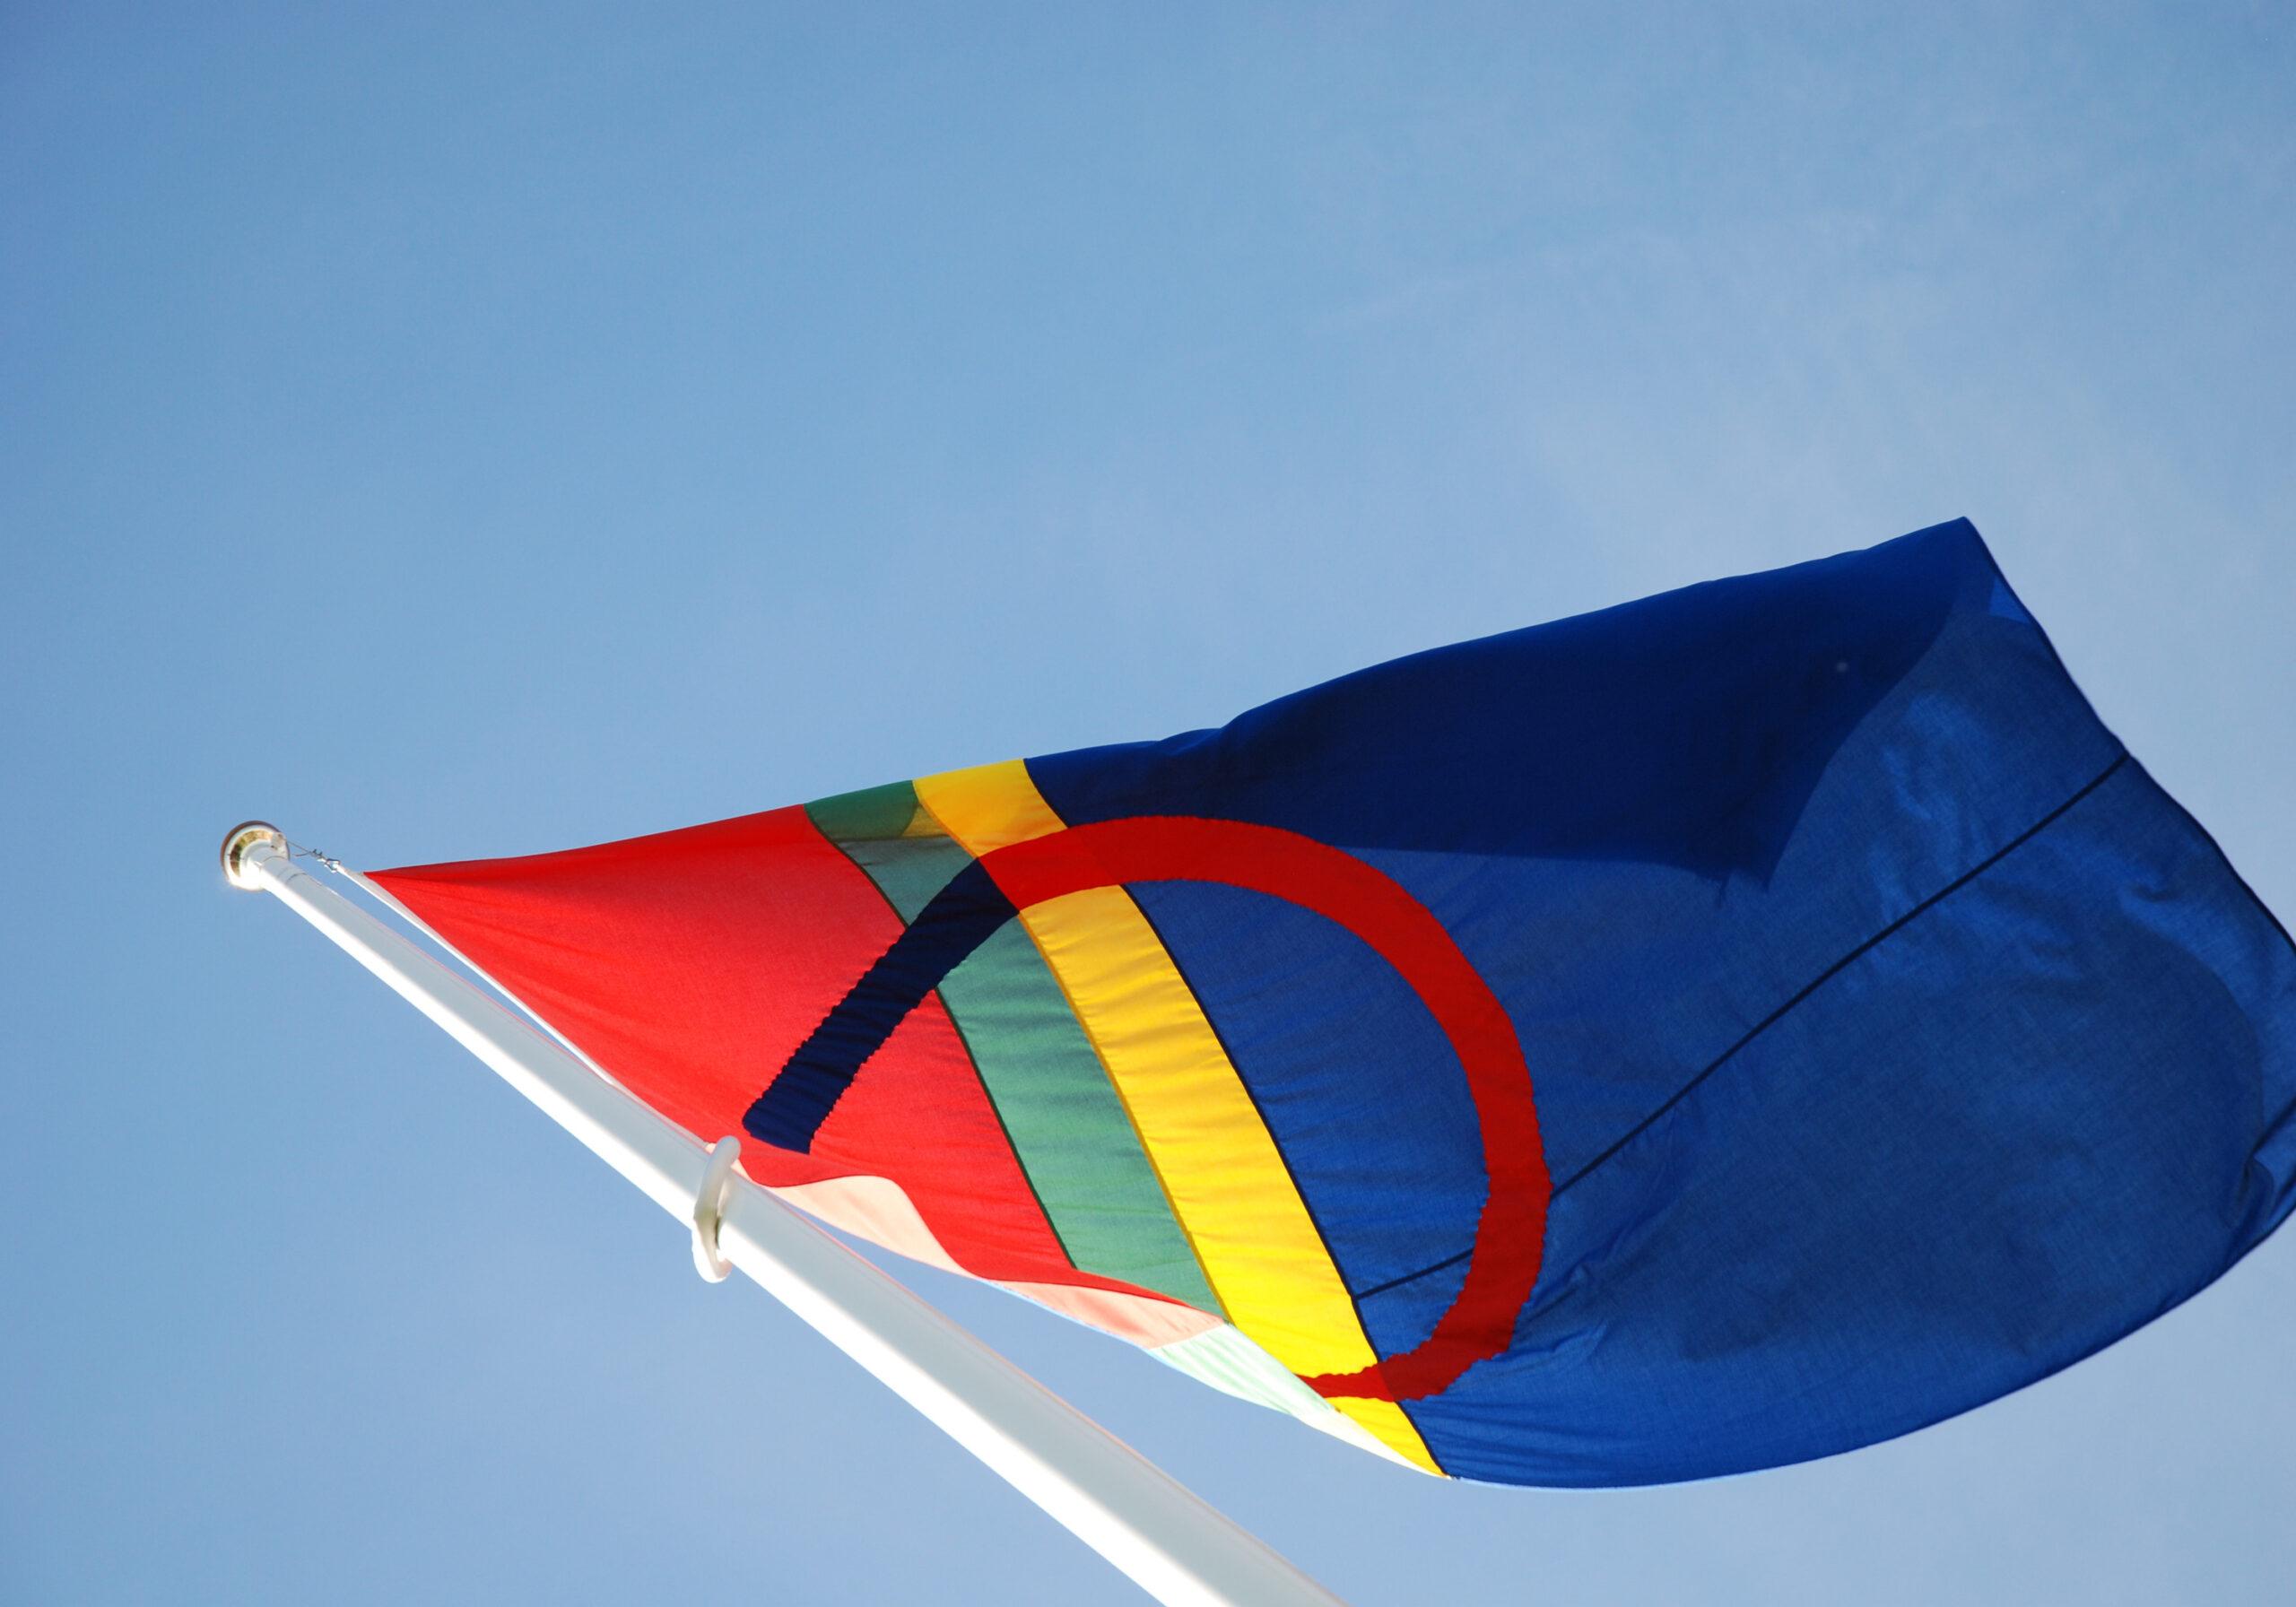 The Sami flag - red, blue, green and yellow – blowing in the wind.